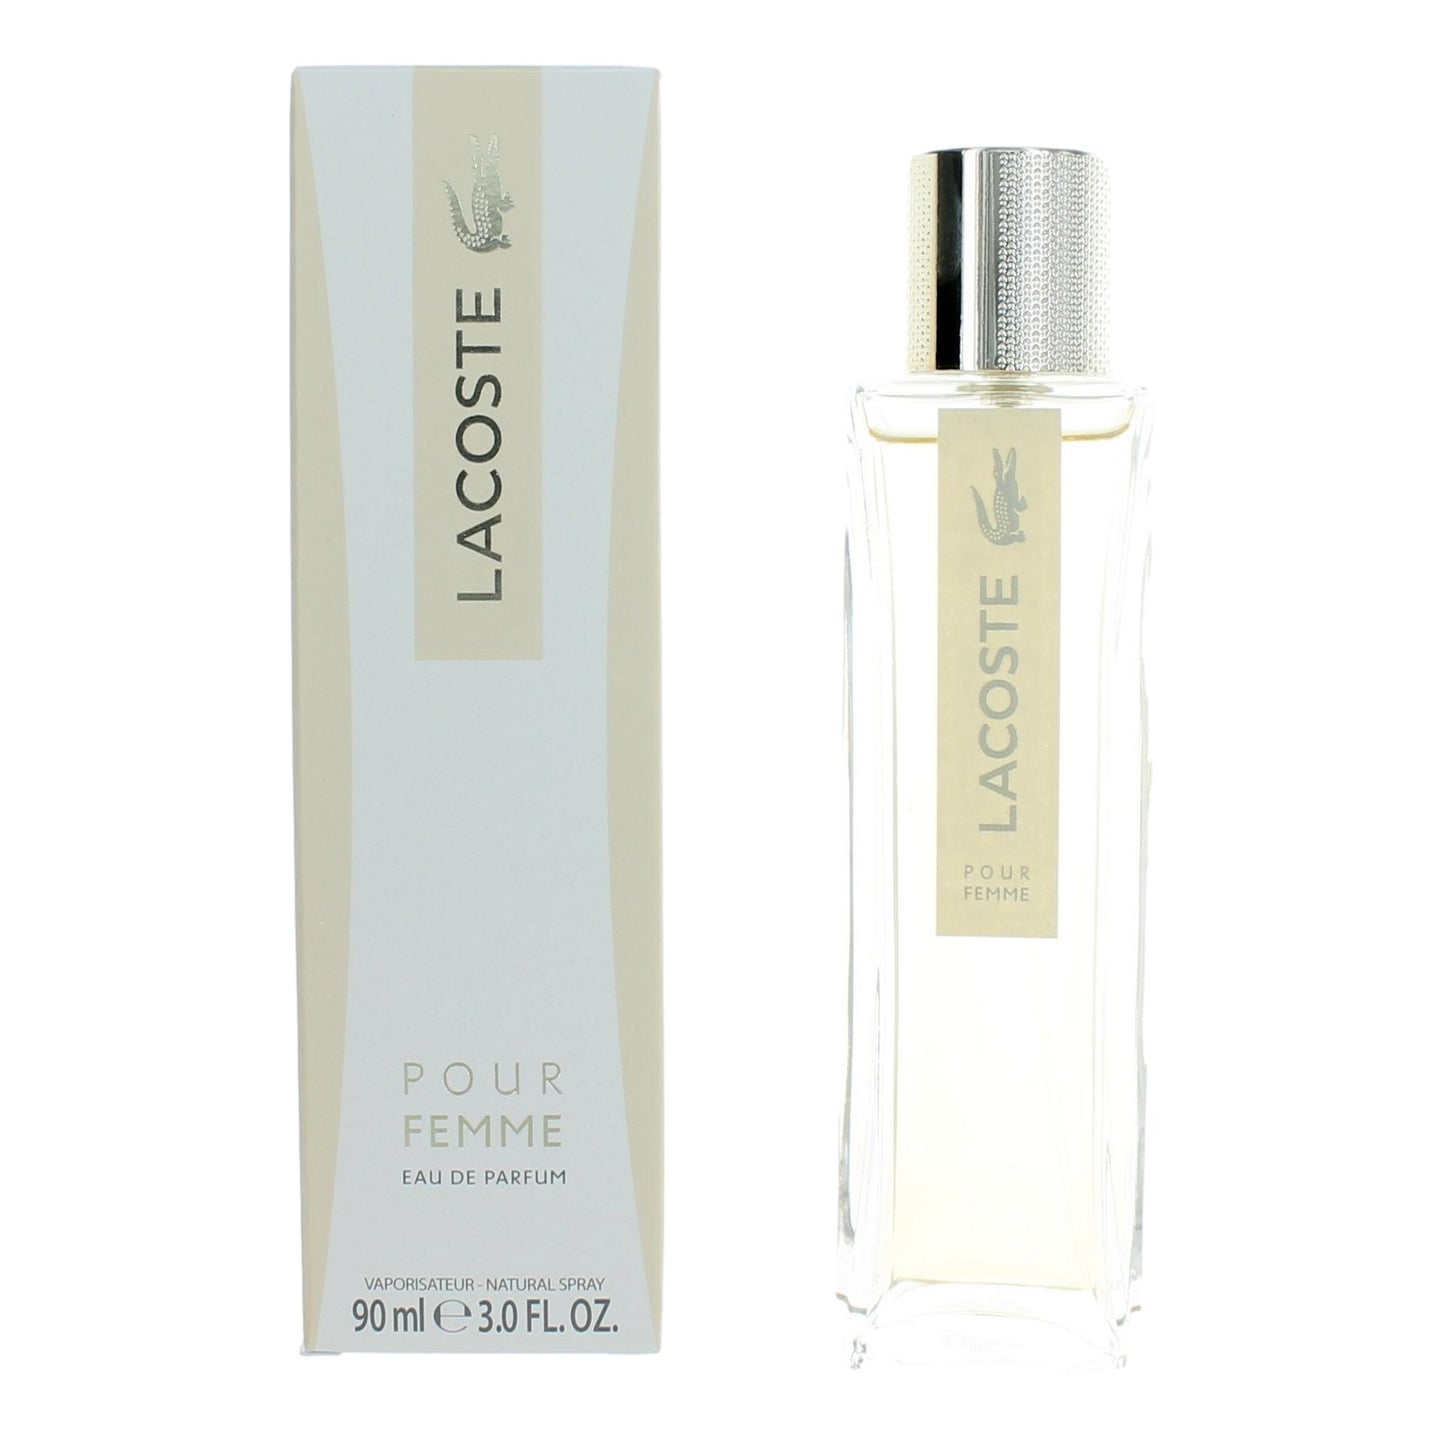 Lacoste Pour Femme by Lacoste, 3 oz EDP Spray for Women